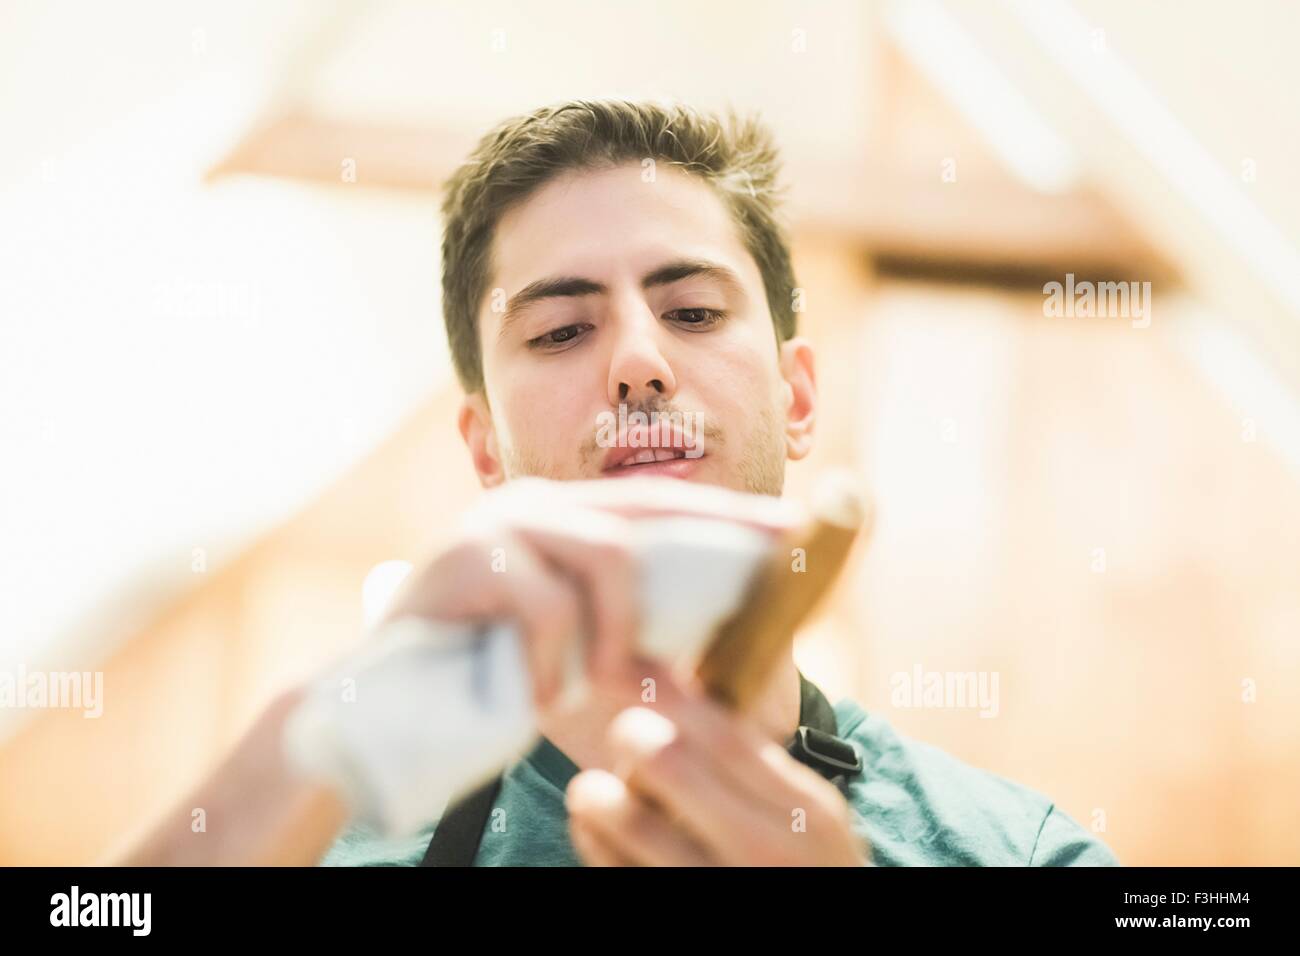 Low angle view of young man crafting wood object, looking down Stock Photo